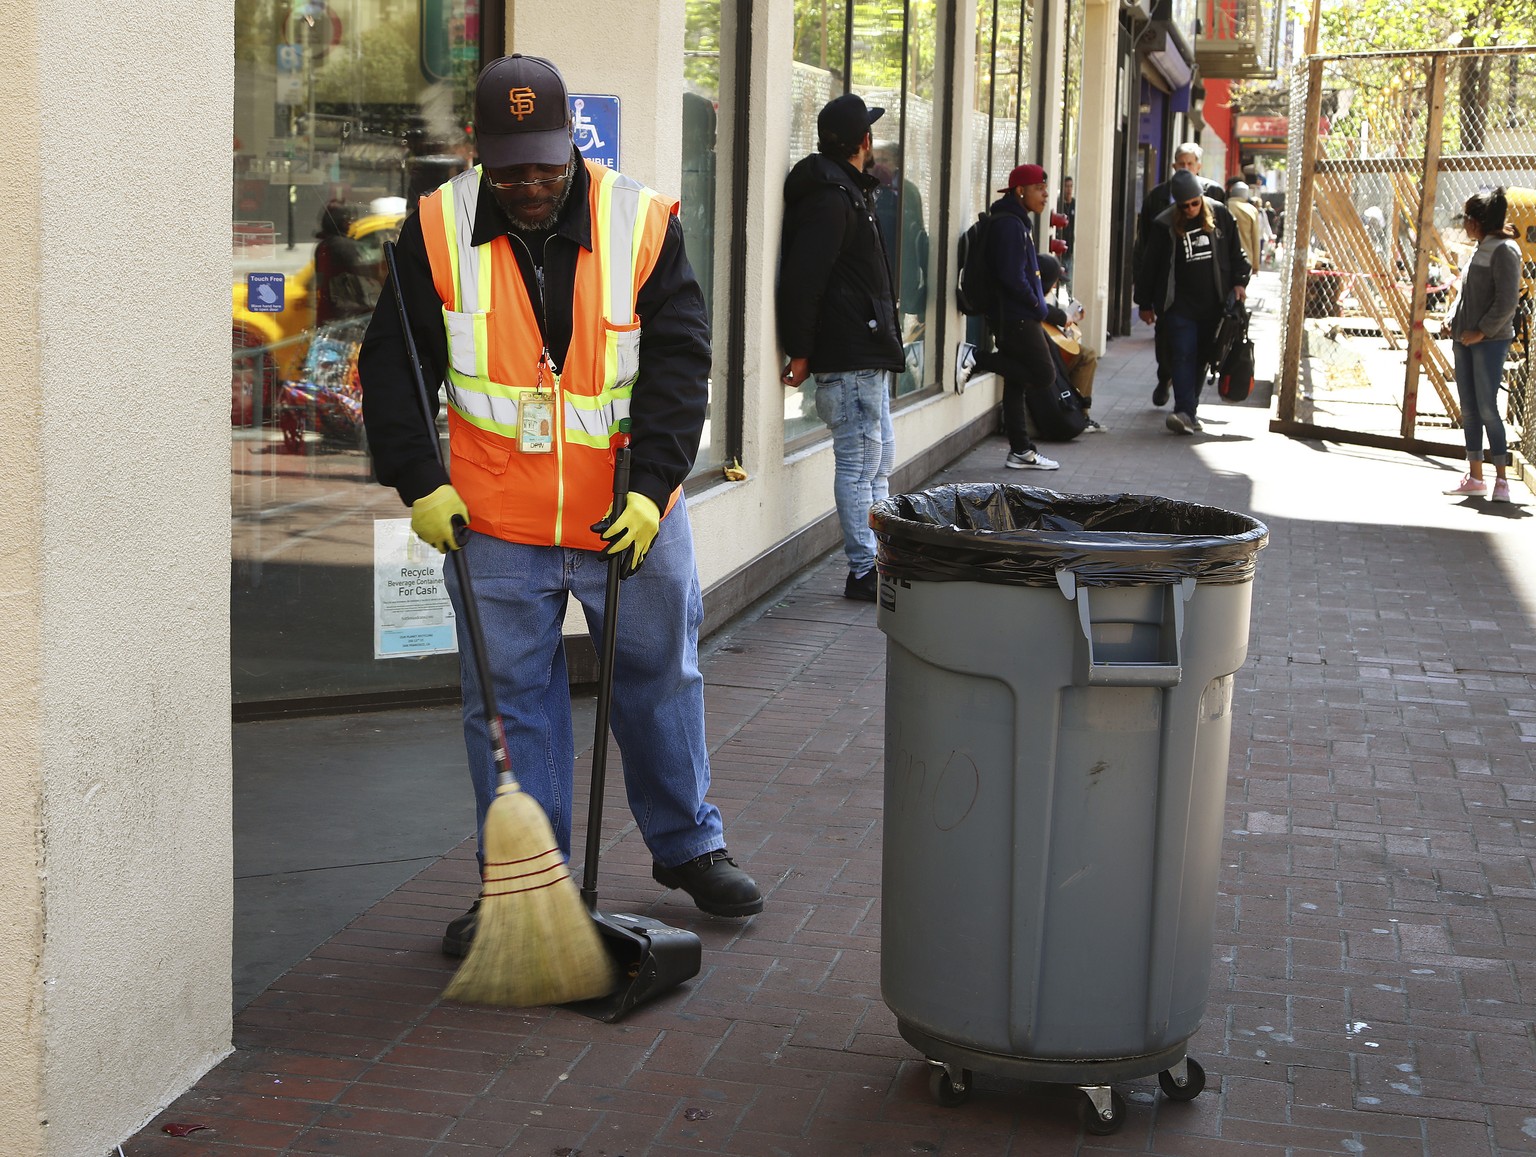 In this photo taken on Thursday, April 26, 2018, a city sanitation worker sweeps Market Street in San Francisco. San Francisco may have hit peak saturation with the stinky urine, used syringes and tra ...